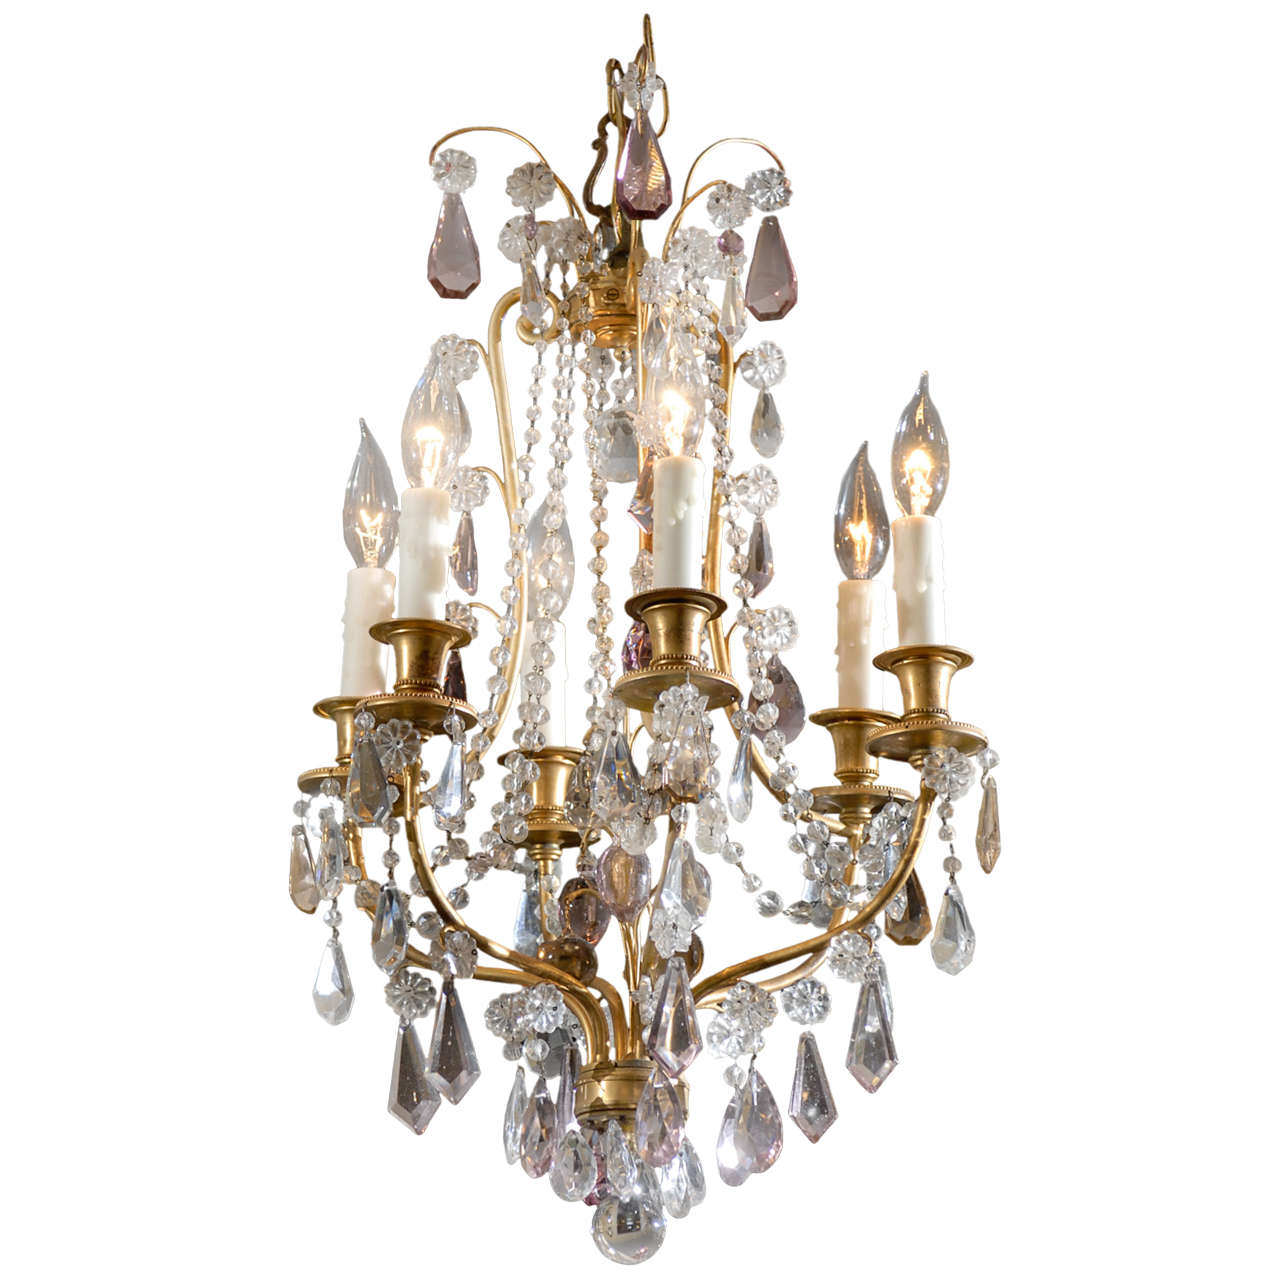 Early 20thc French Gilt Bronze Chandelier With Amethyst Crystals